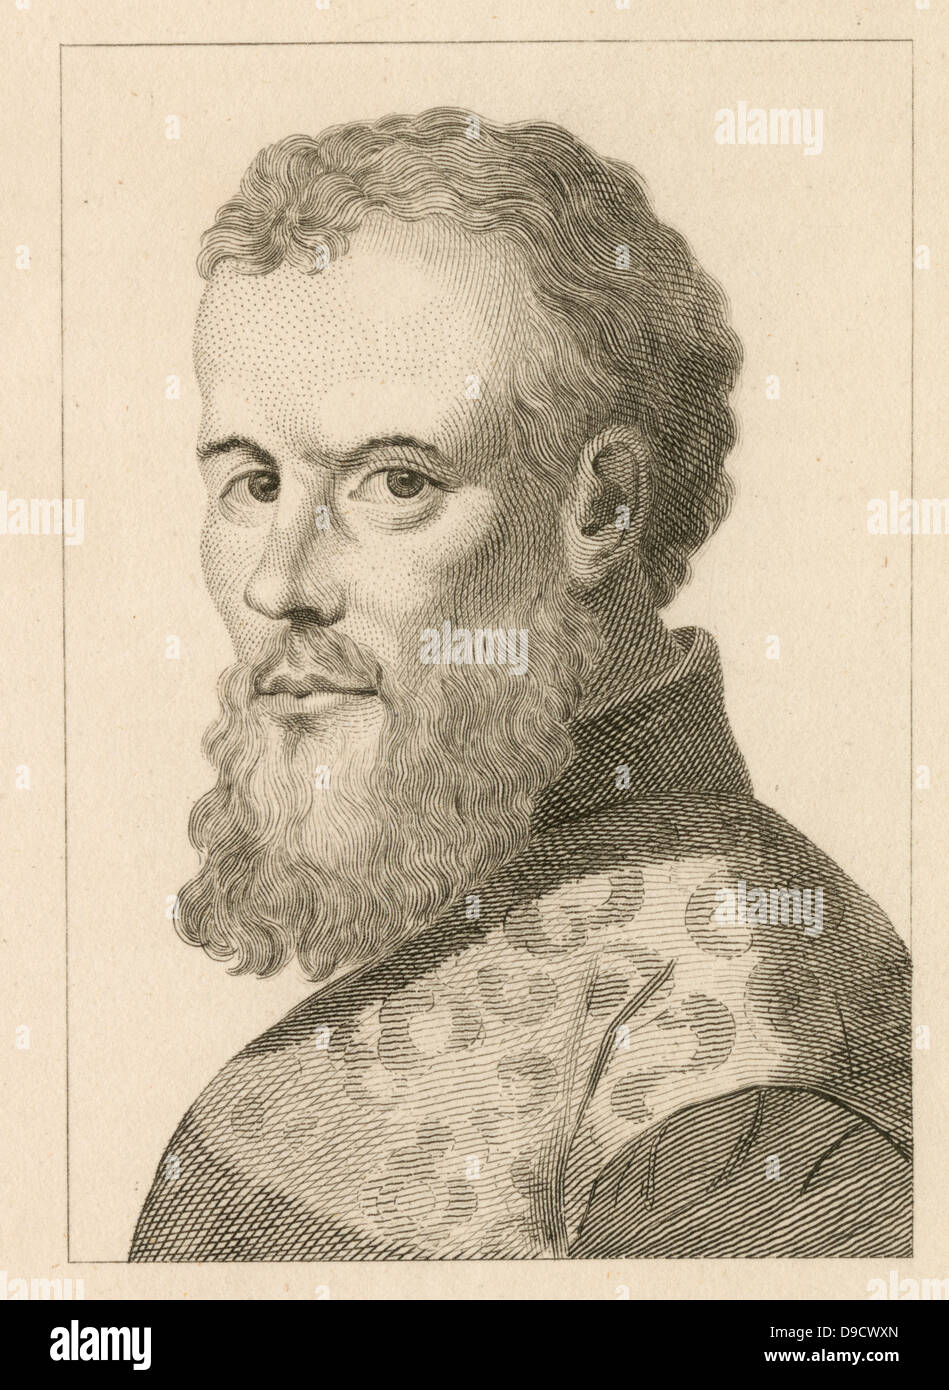 Andreas Vesalius (1514-1564) Flemish anatomist and physician. Author of the seminal book on human anatomy De humani corporis fabrica (On the Structure of the Human Body) Amsterdam, 1543. Engraving. Stock Photo